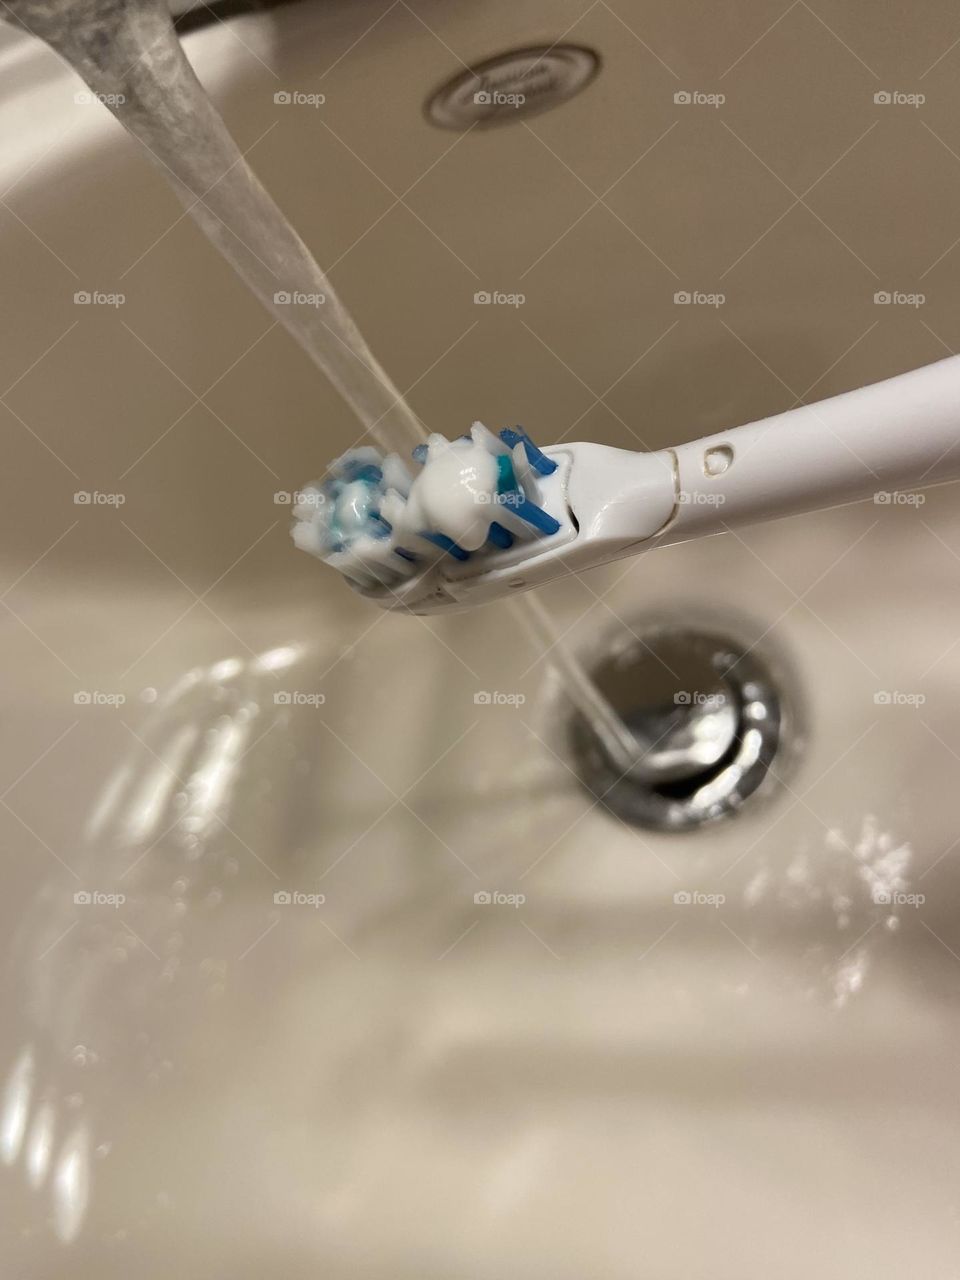 Wetting my electric toothbrush with water from the faucet in the bathroom sink in preparation for brushing my teeth 